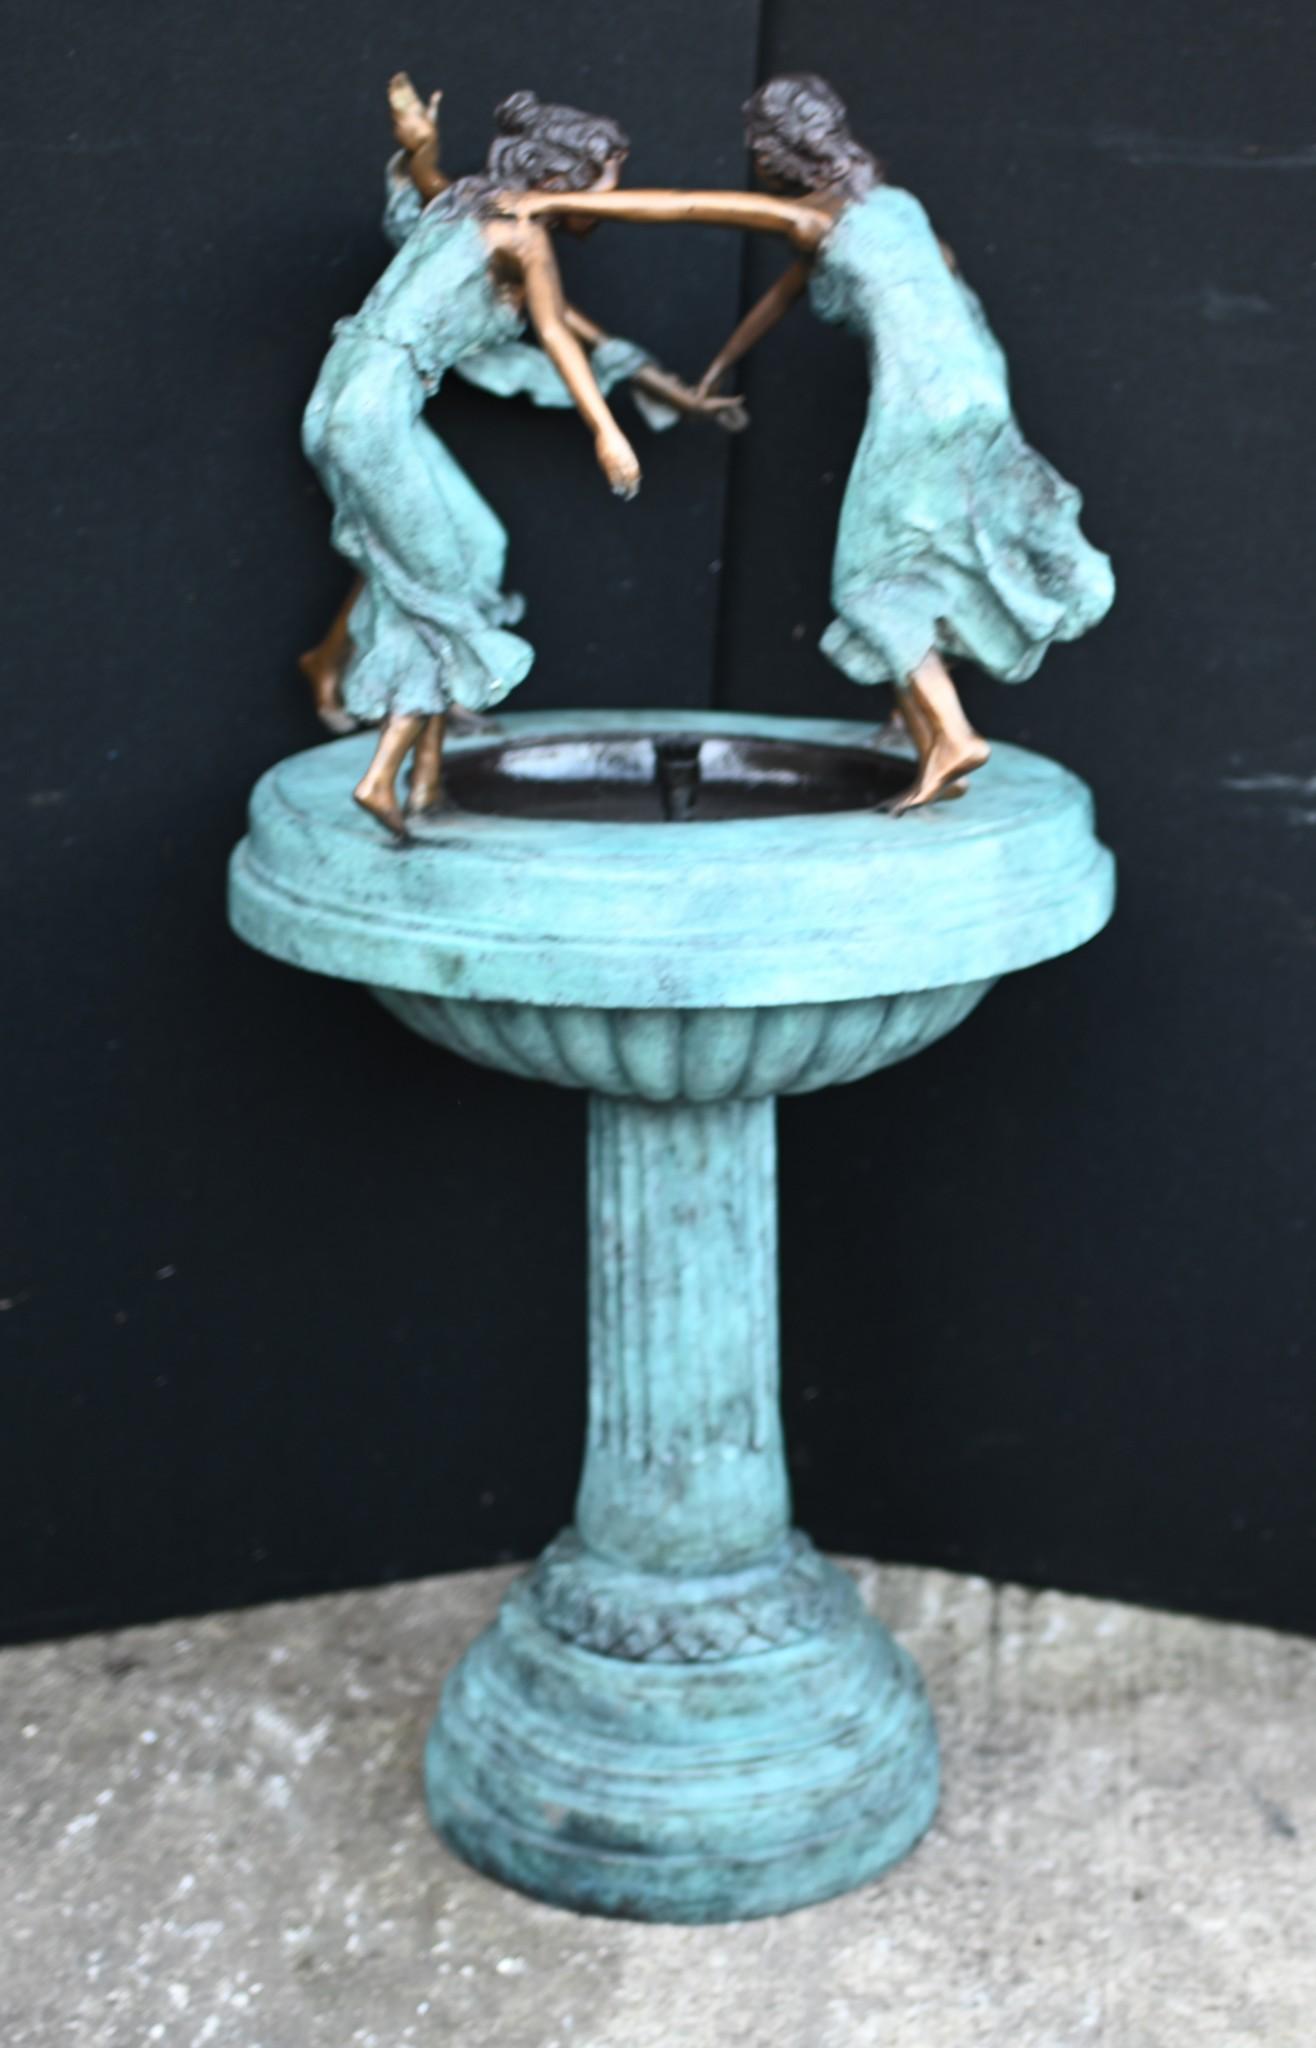 Delightful bronze garden water fountain 
In the Art Nouveau manner, the fountain features a quartet of faireys
Frolicking maidens are depicted dancing around the rim of the fountain
Such a charming piece, would bring any garden alive
Great work